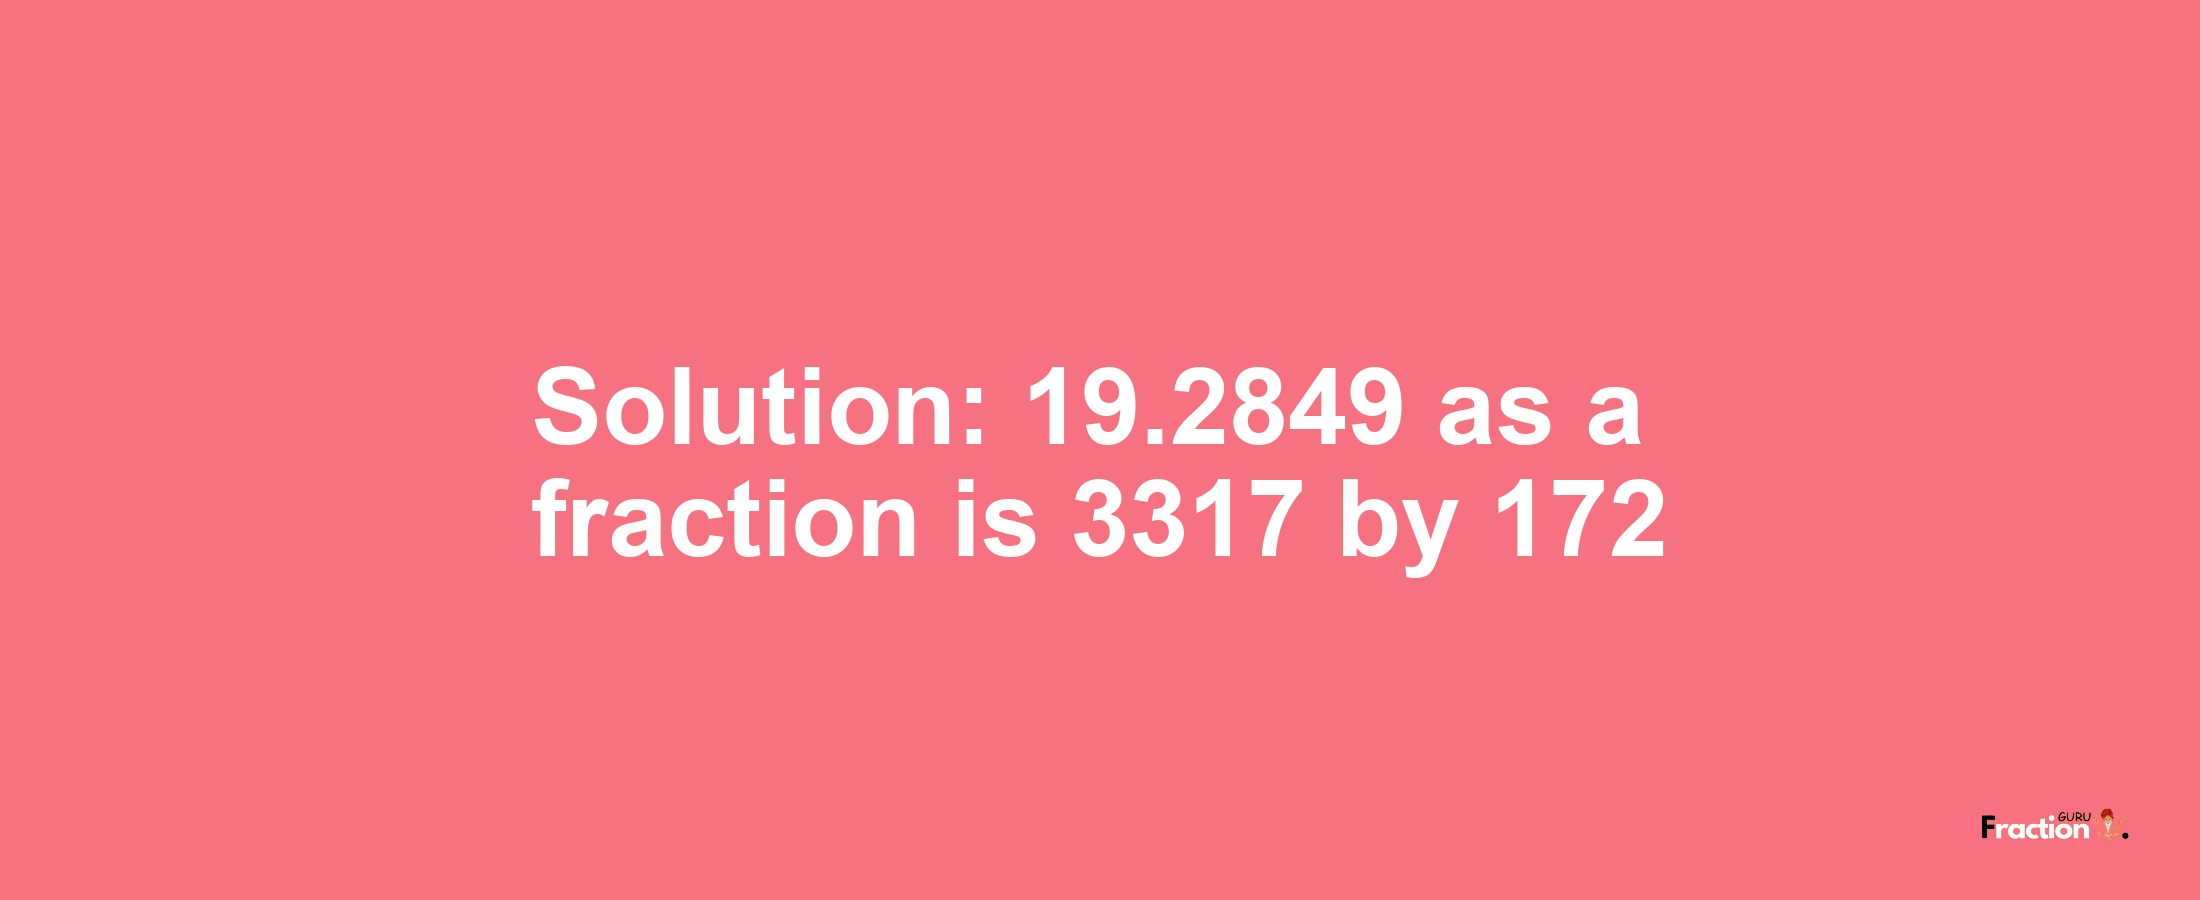 Solution:19.2849 as a fraction is 3317/172